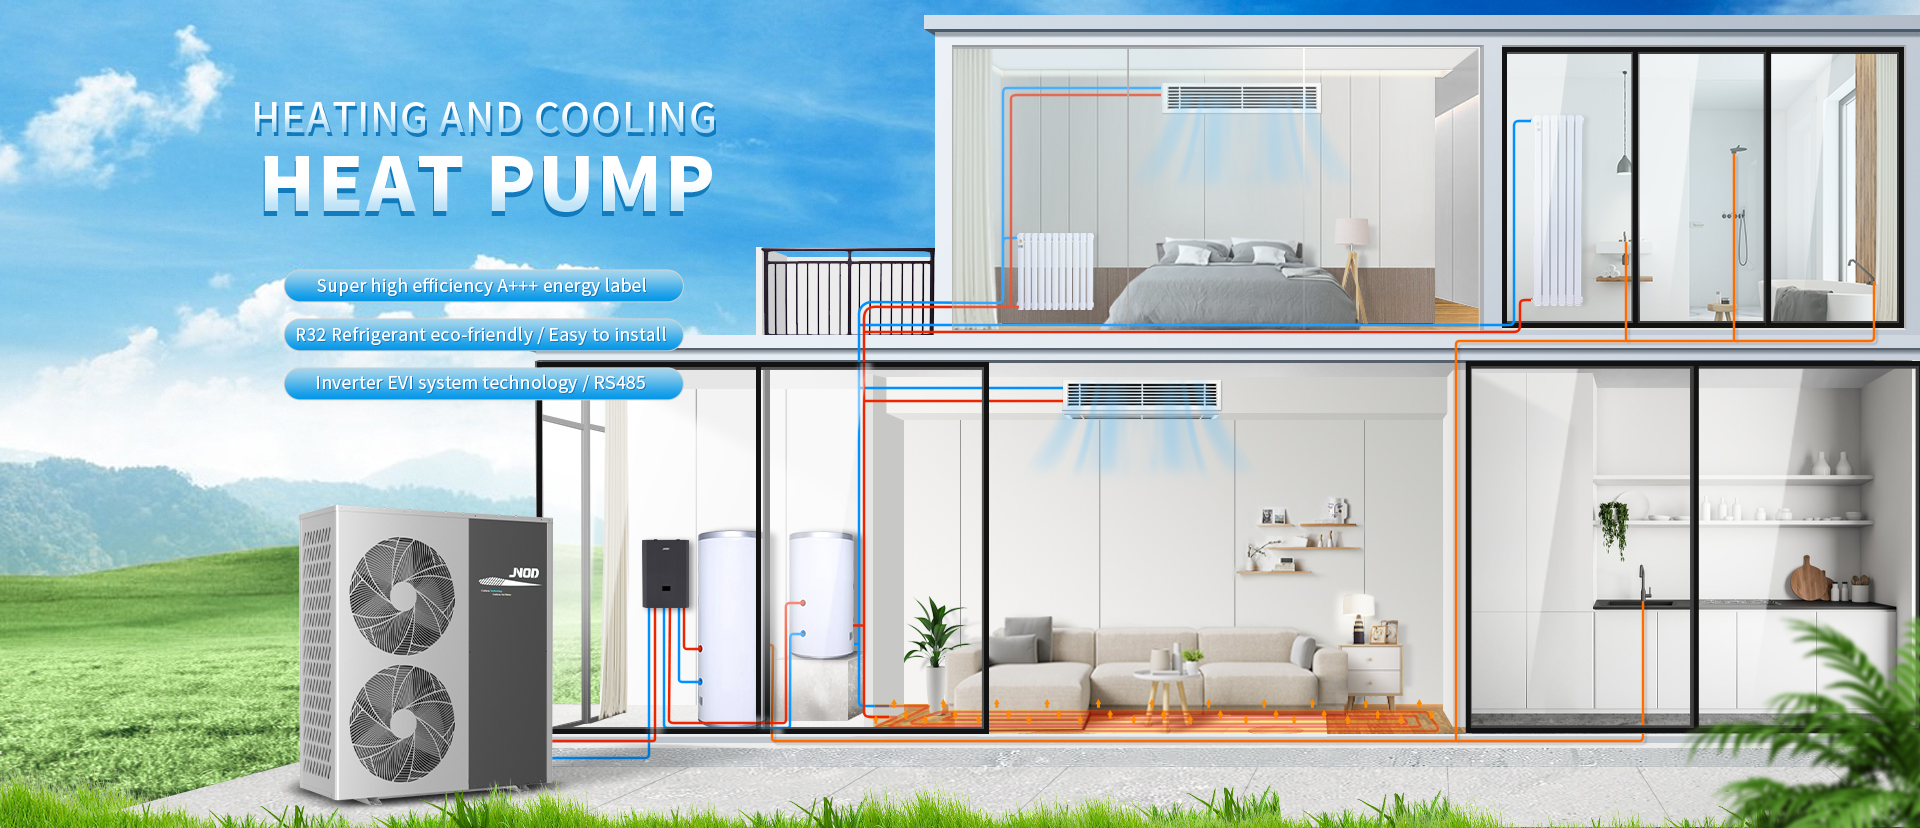 Heating And Cooling Heat Pump export company